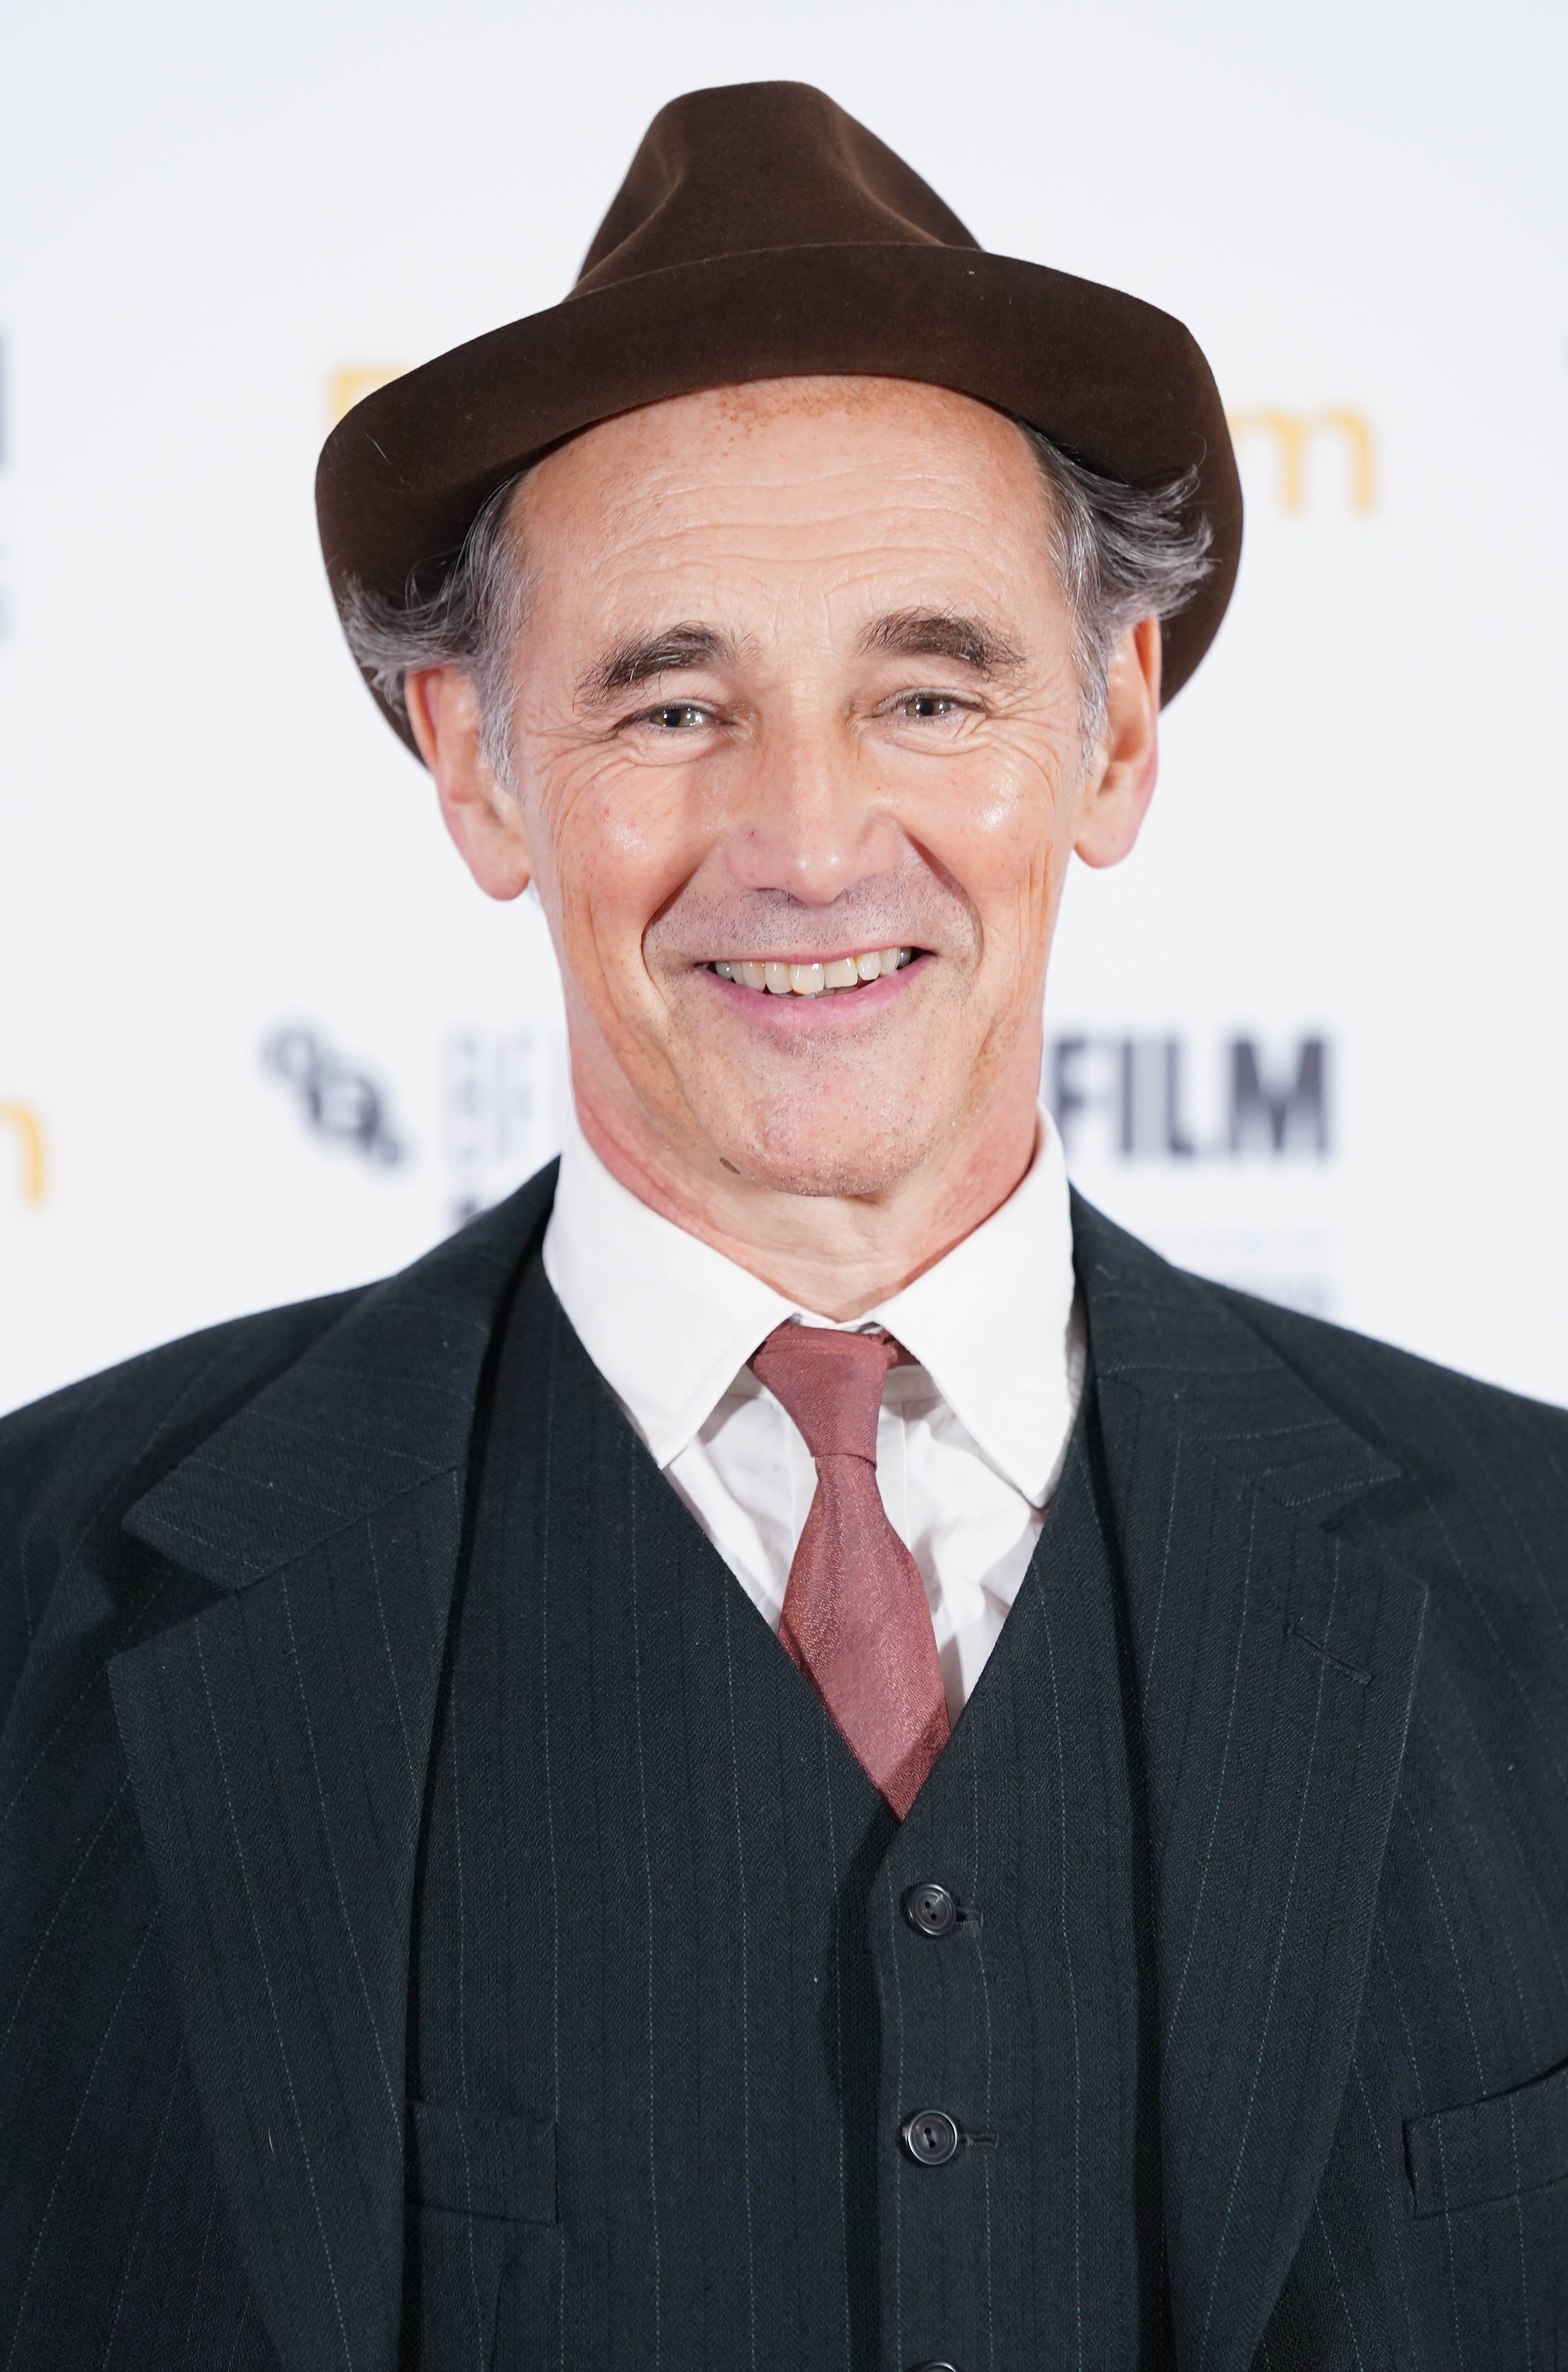 Sir Mark Rylance quit the RSC in protest at its sponsorship by BP